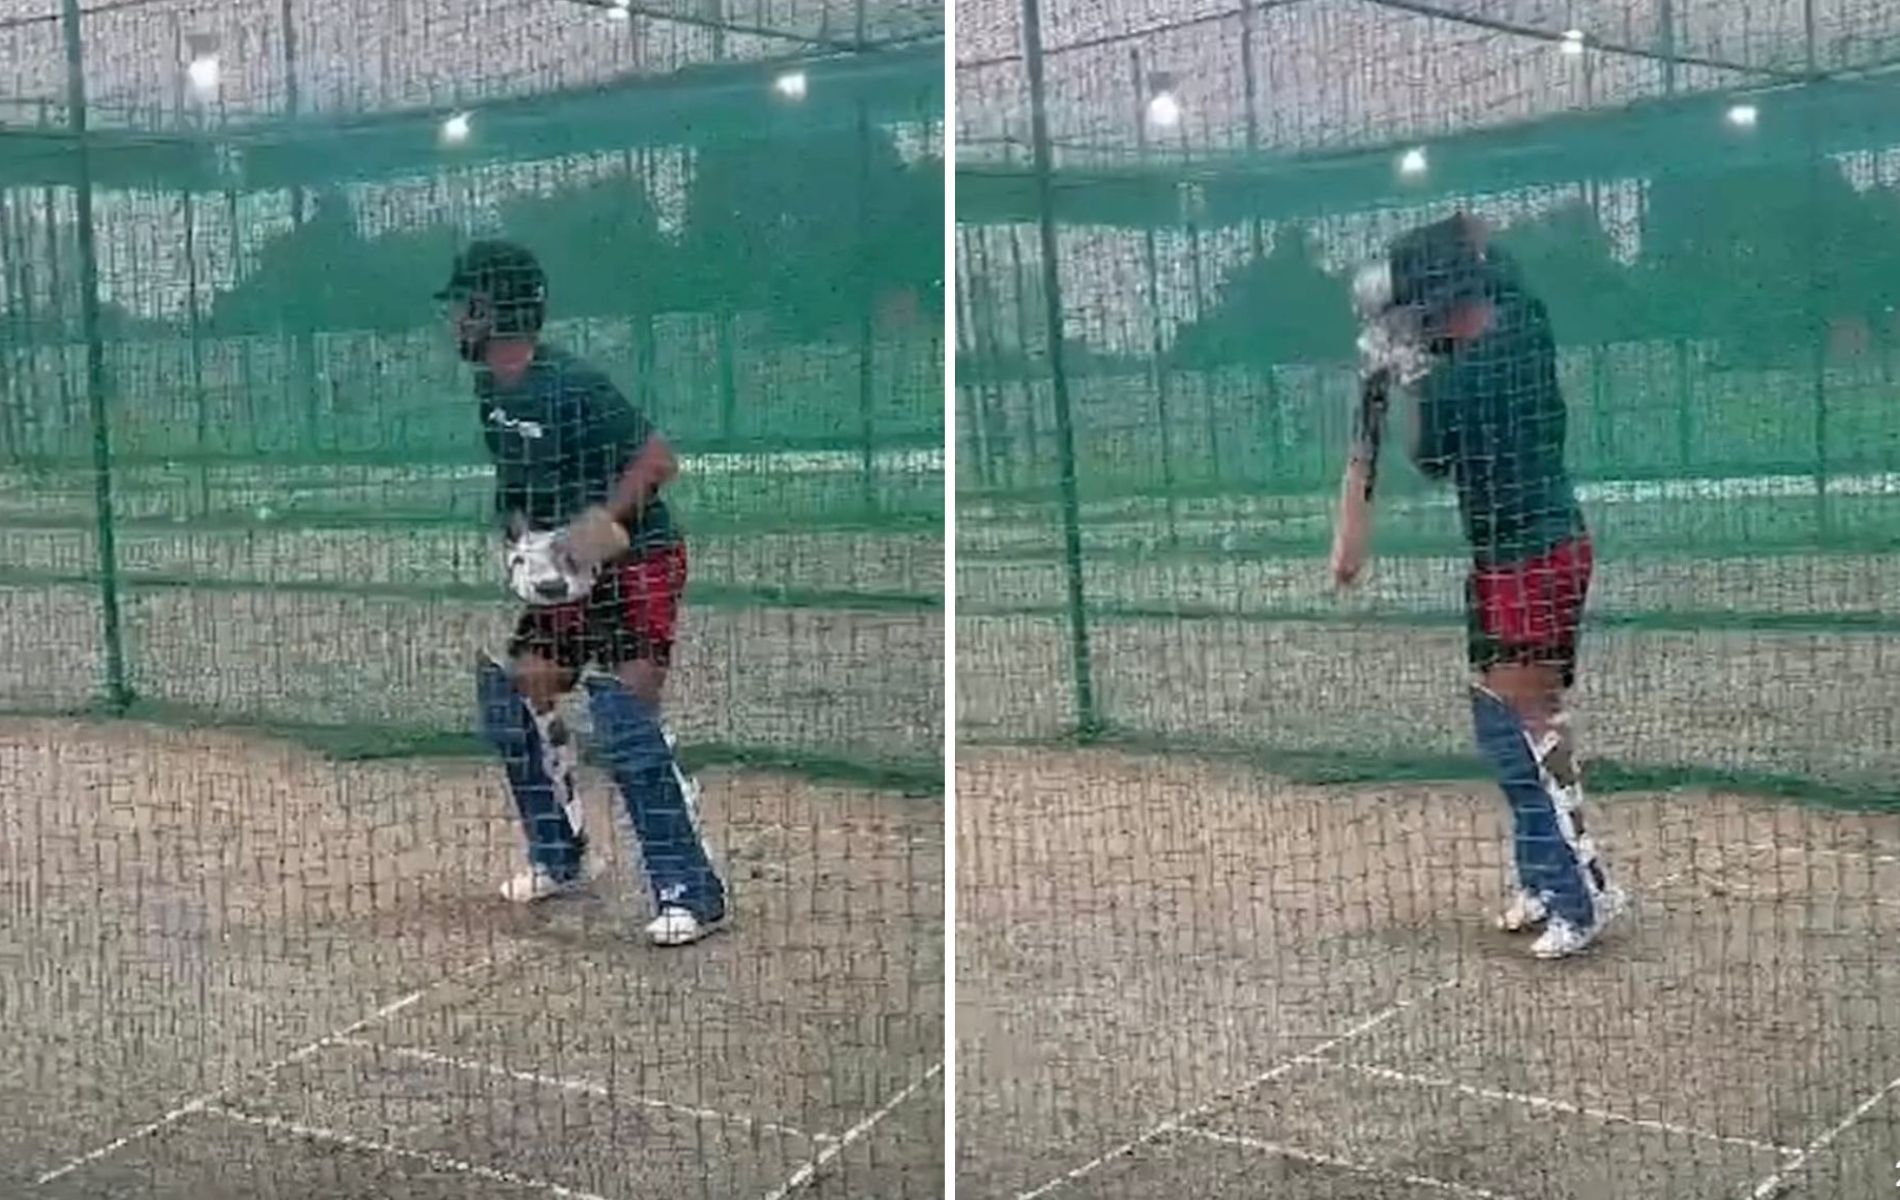 Shikhar Dhawan during a practice session. (Pics: Instagram)